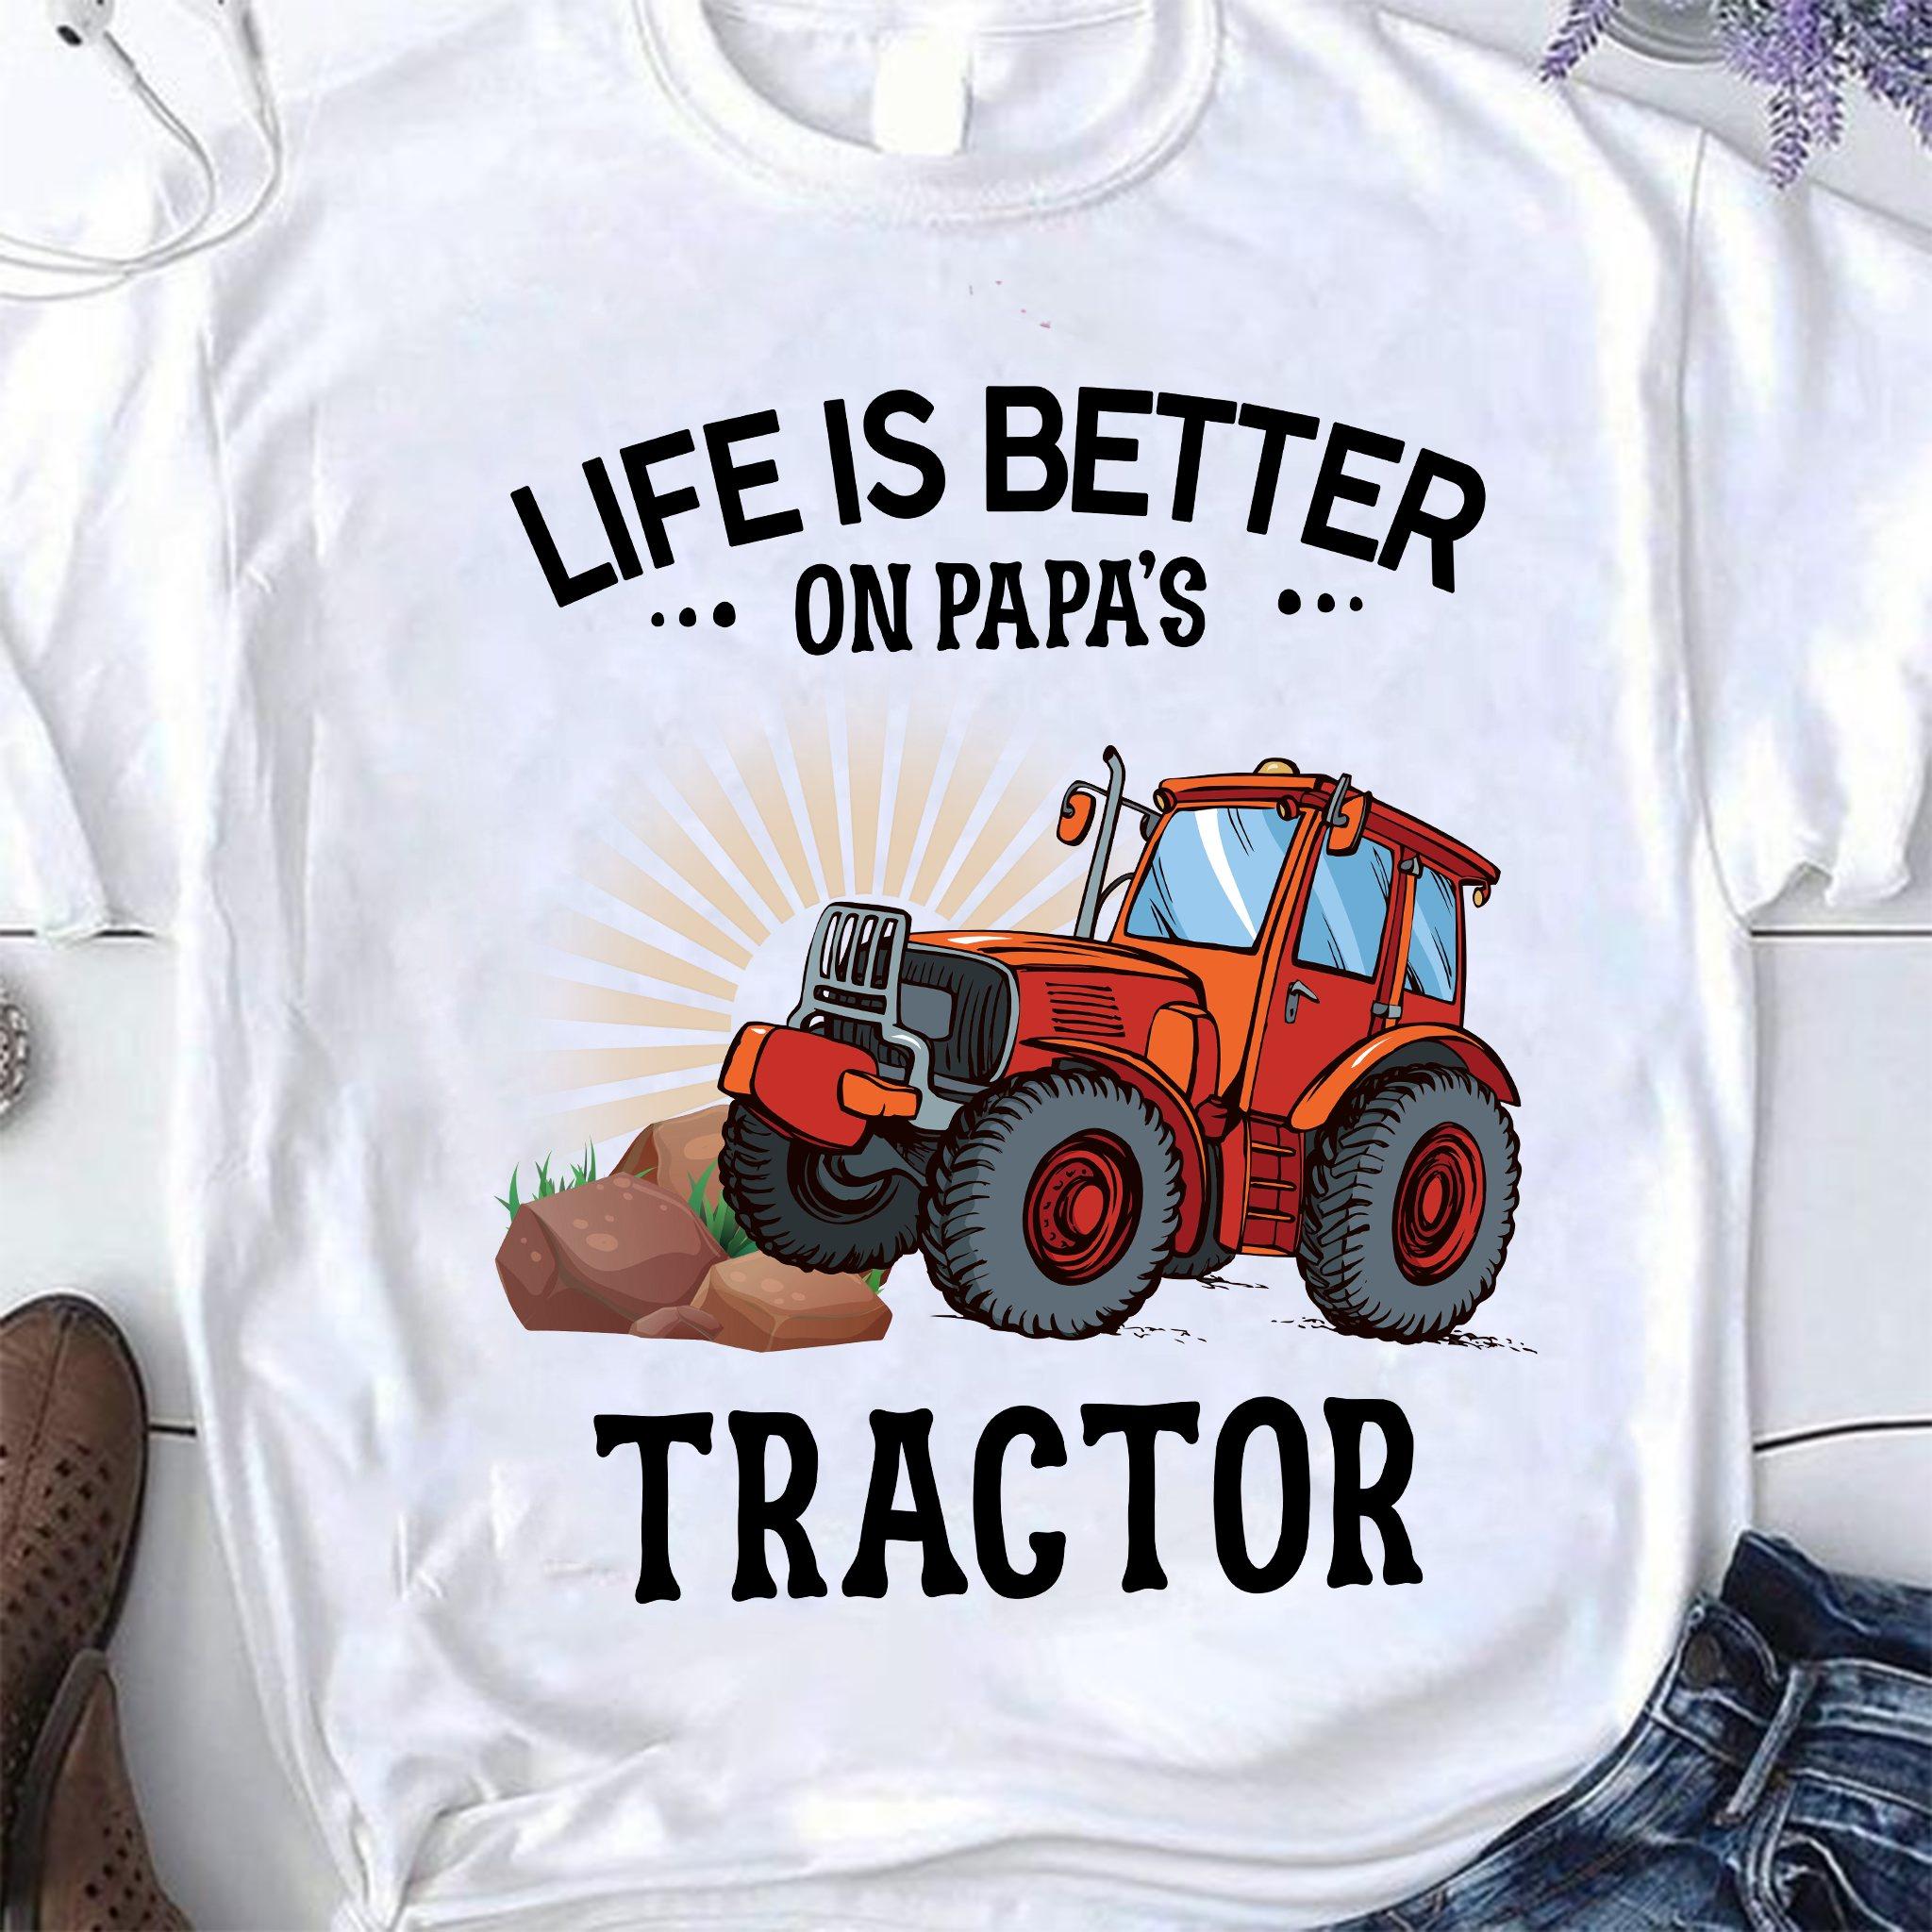 Tractor graphic t-shirt, Papa Driving Tractor - Life is better on papa's tractor